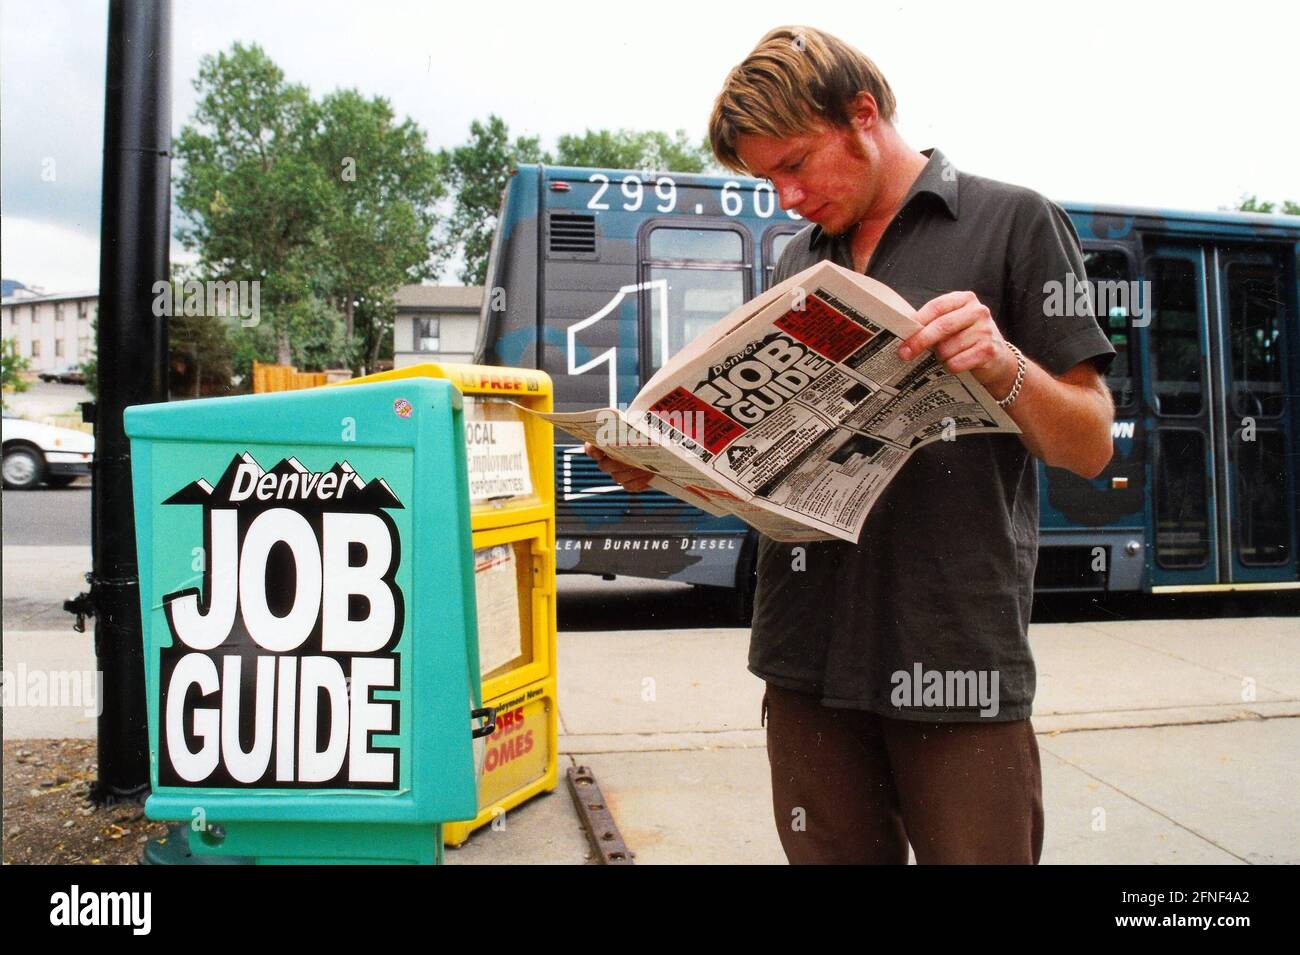 Job hunting in America: teenager reads job ads in 'Denver Job Guide' newspaper. [automated translation] Stock Photo